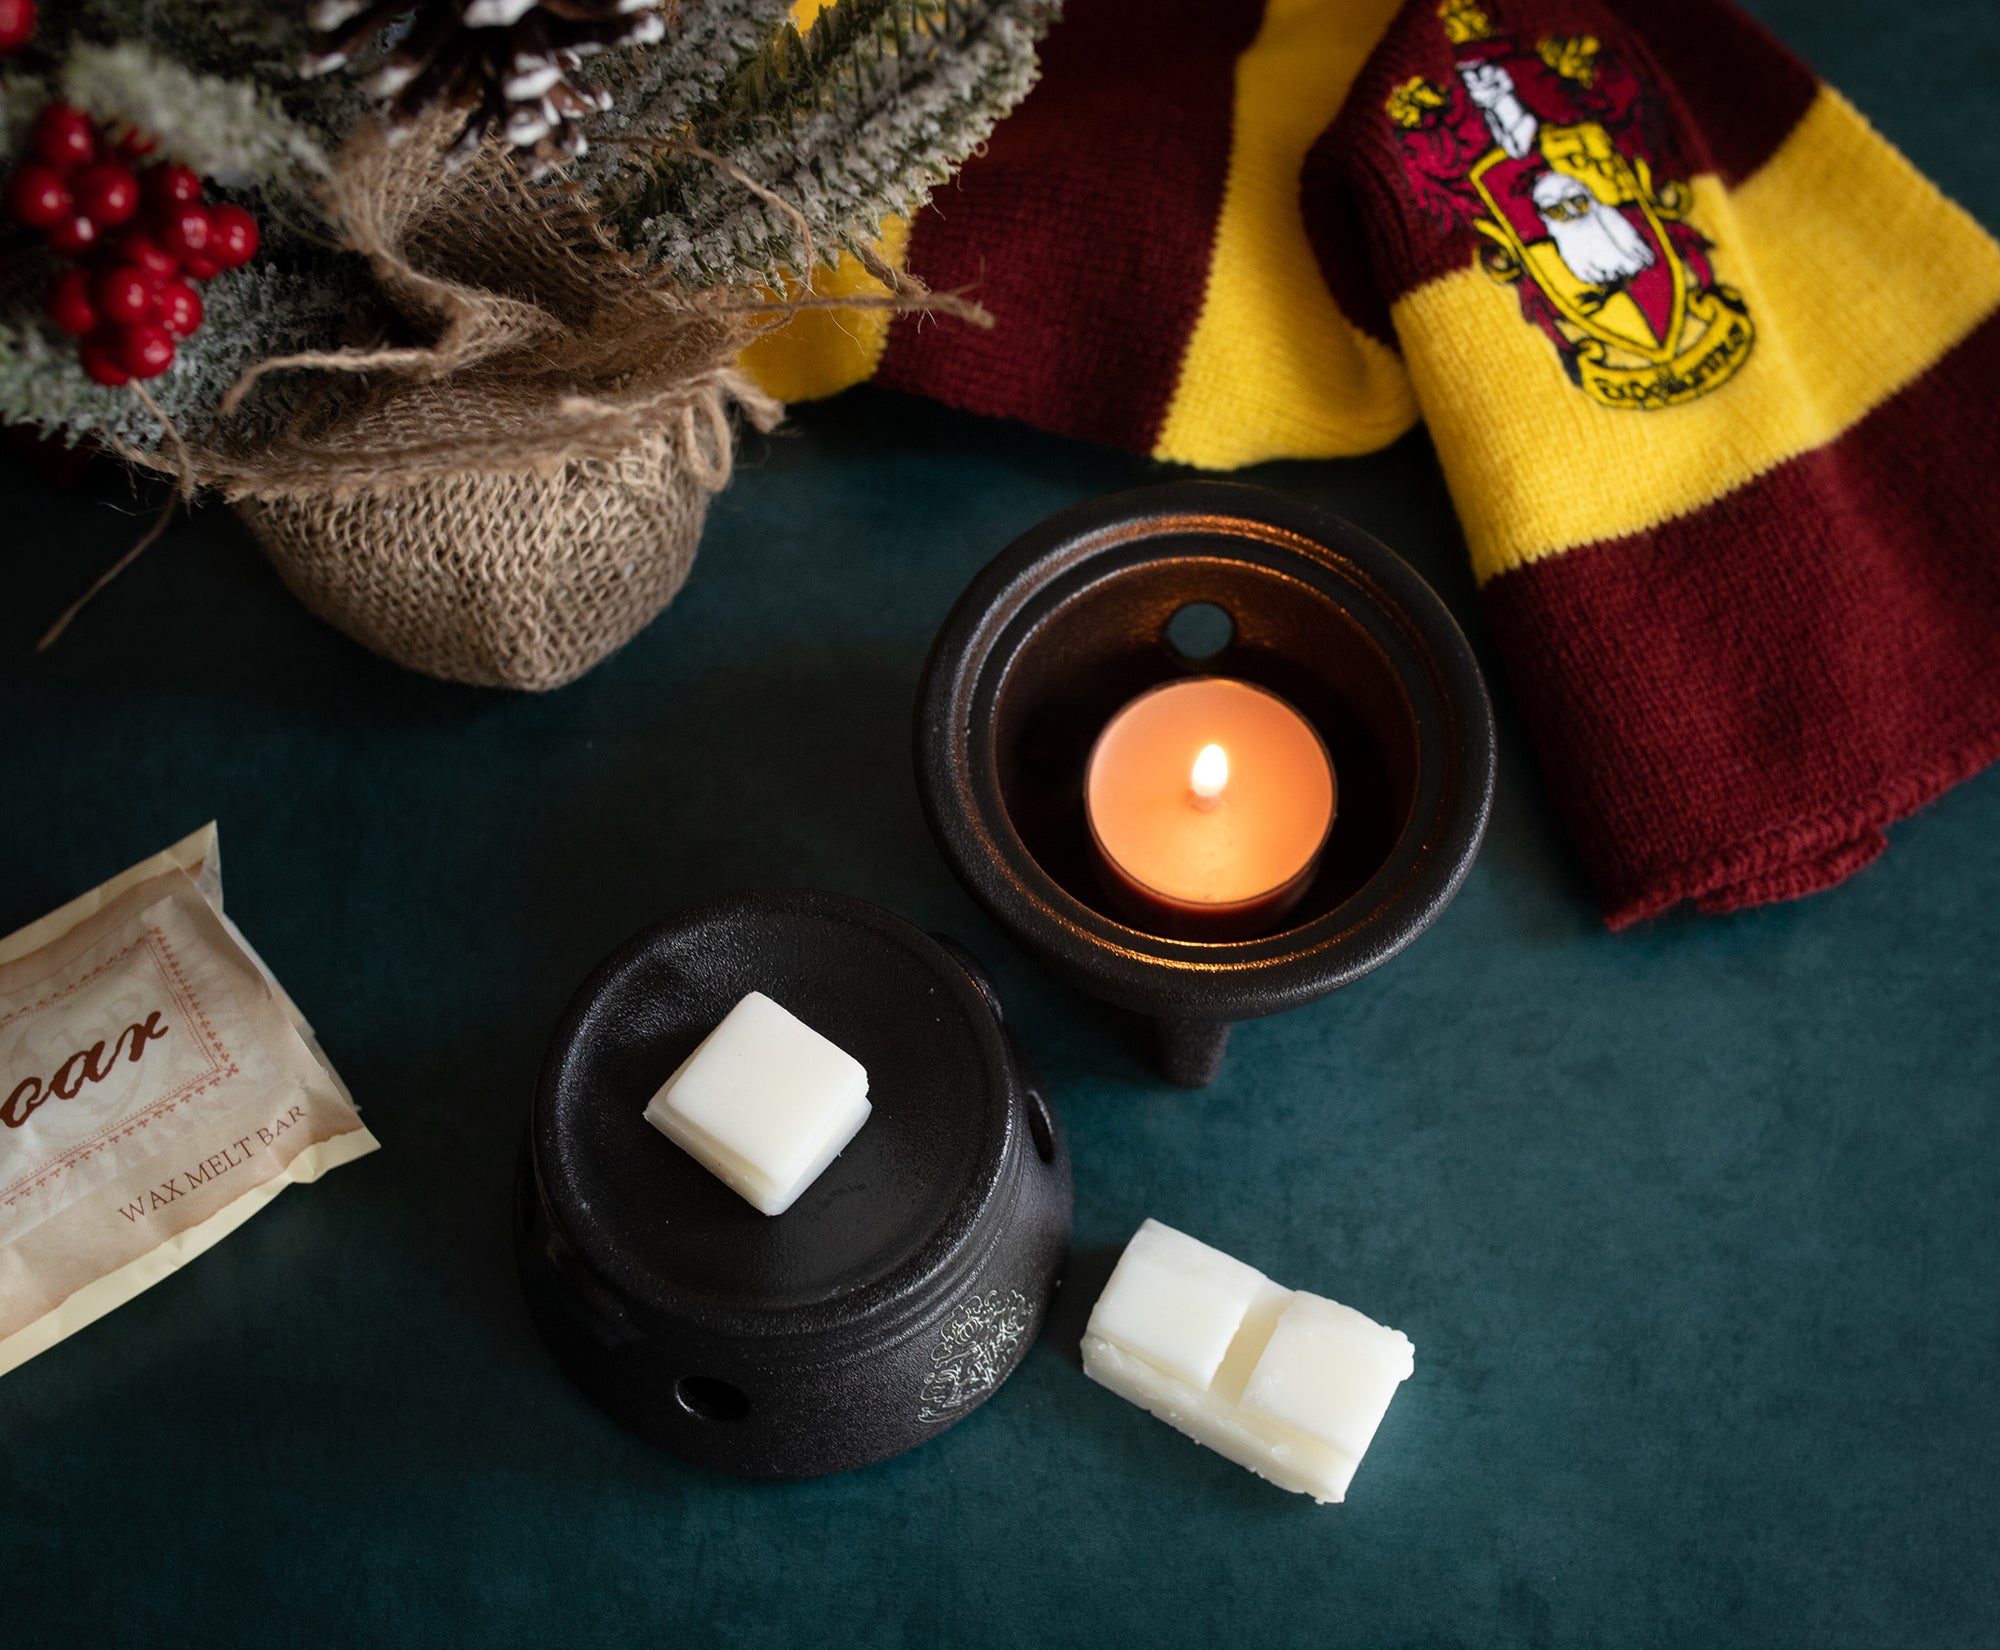 Harry Potter  Harry potter shop, Scentsy bars, Scented wax warmer